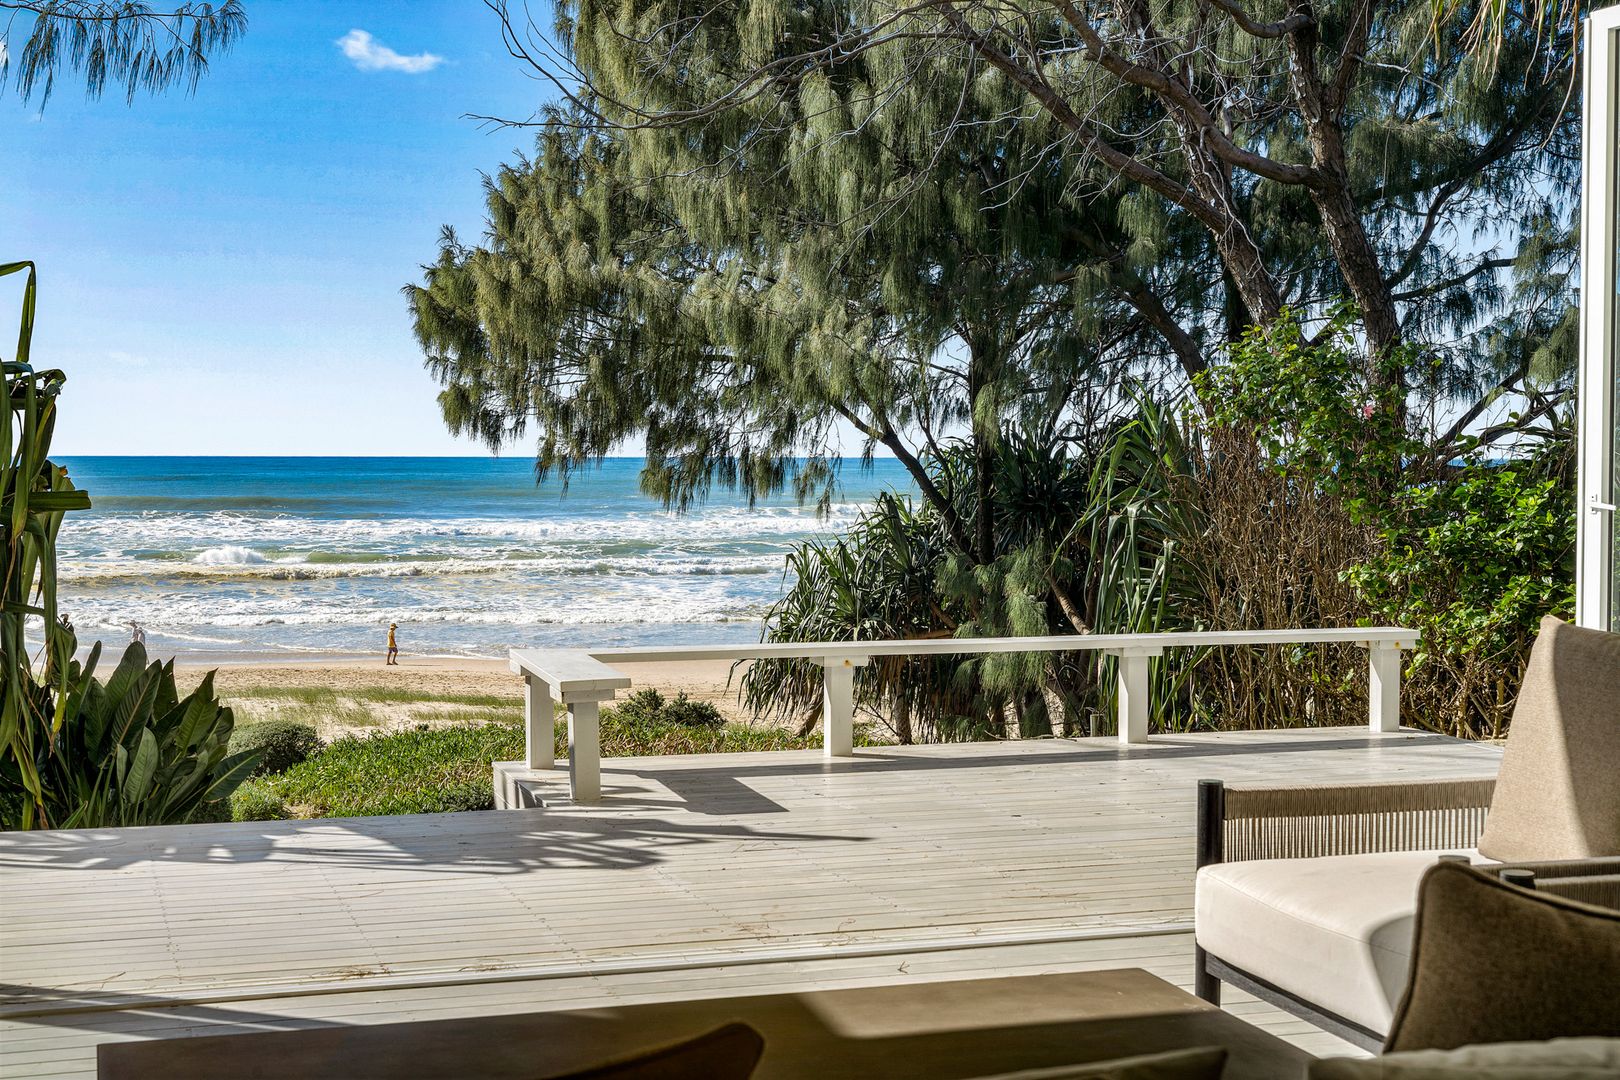 On The Market: This $14 Million Mermaid Beach Home Is A Slice Of Sun-Drenched Heaven